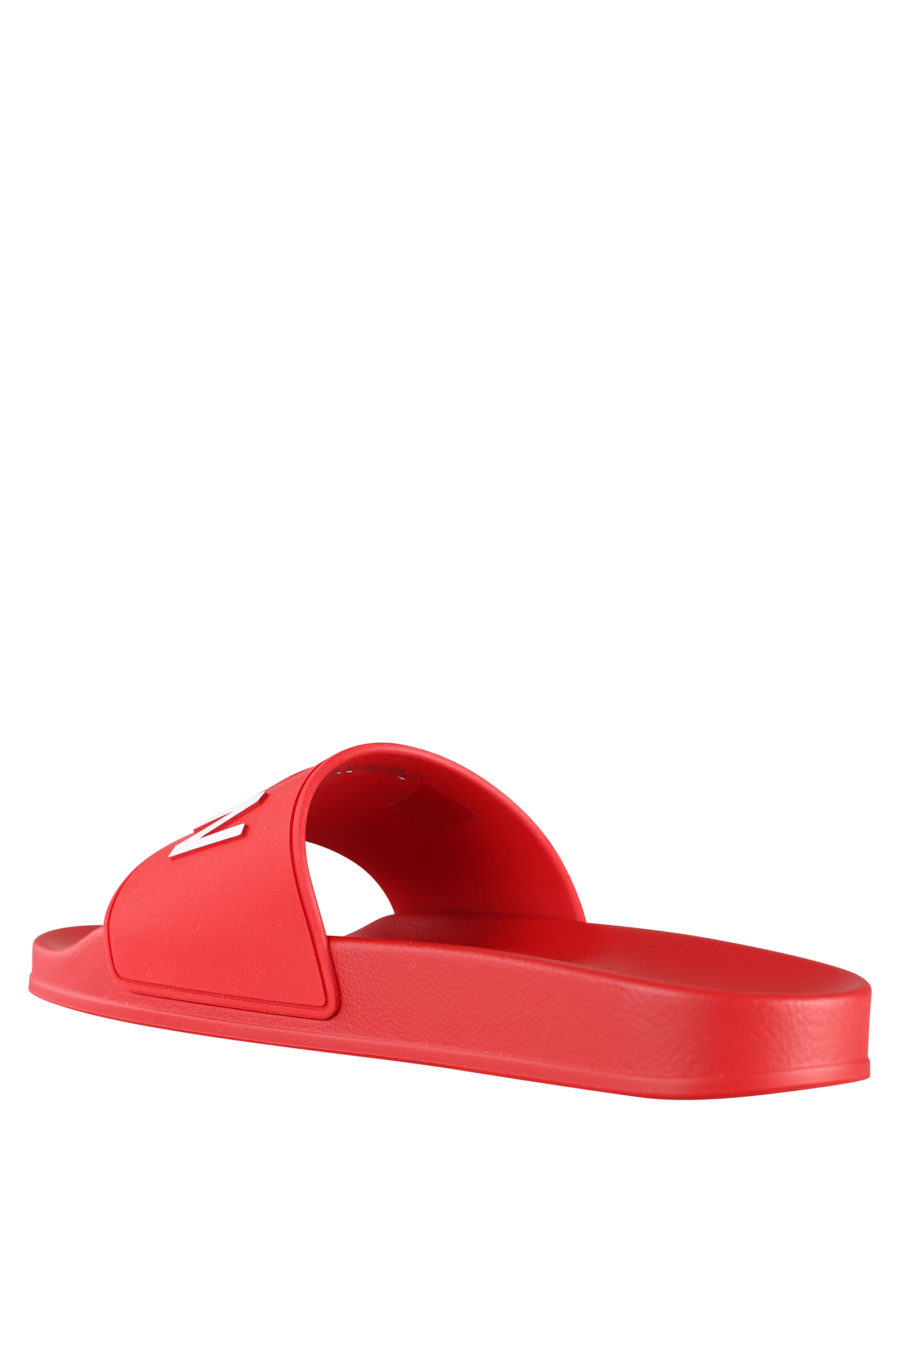 Red flip flops with white "icon" logo - IMG 9943